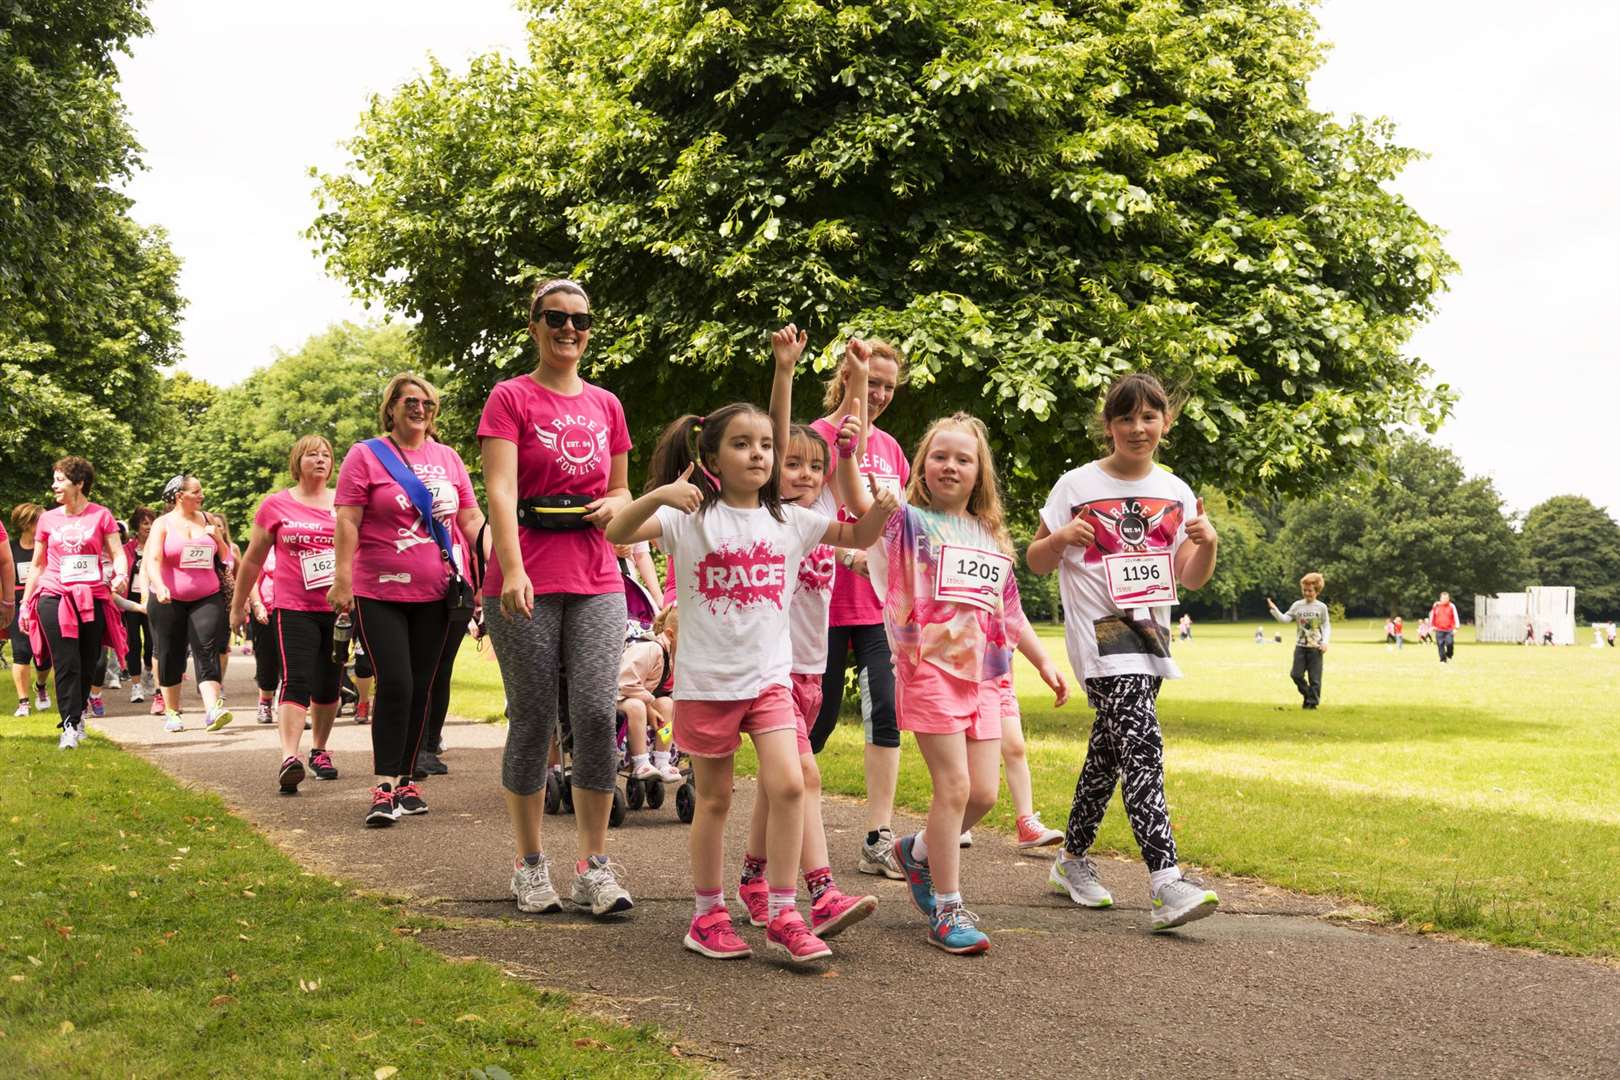 Sign up to take part in your local Race for Life. Picture: iStock